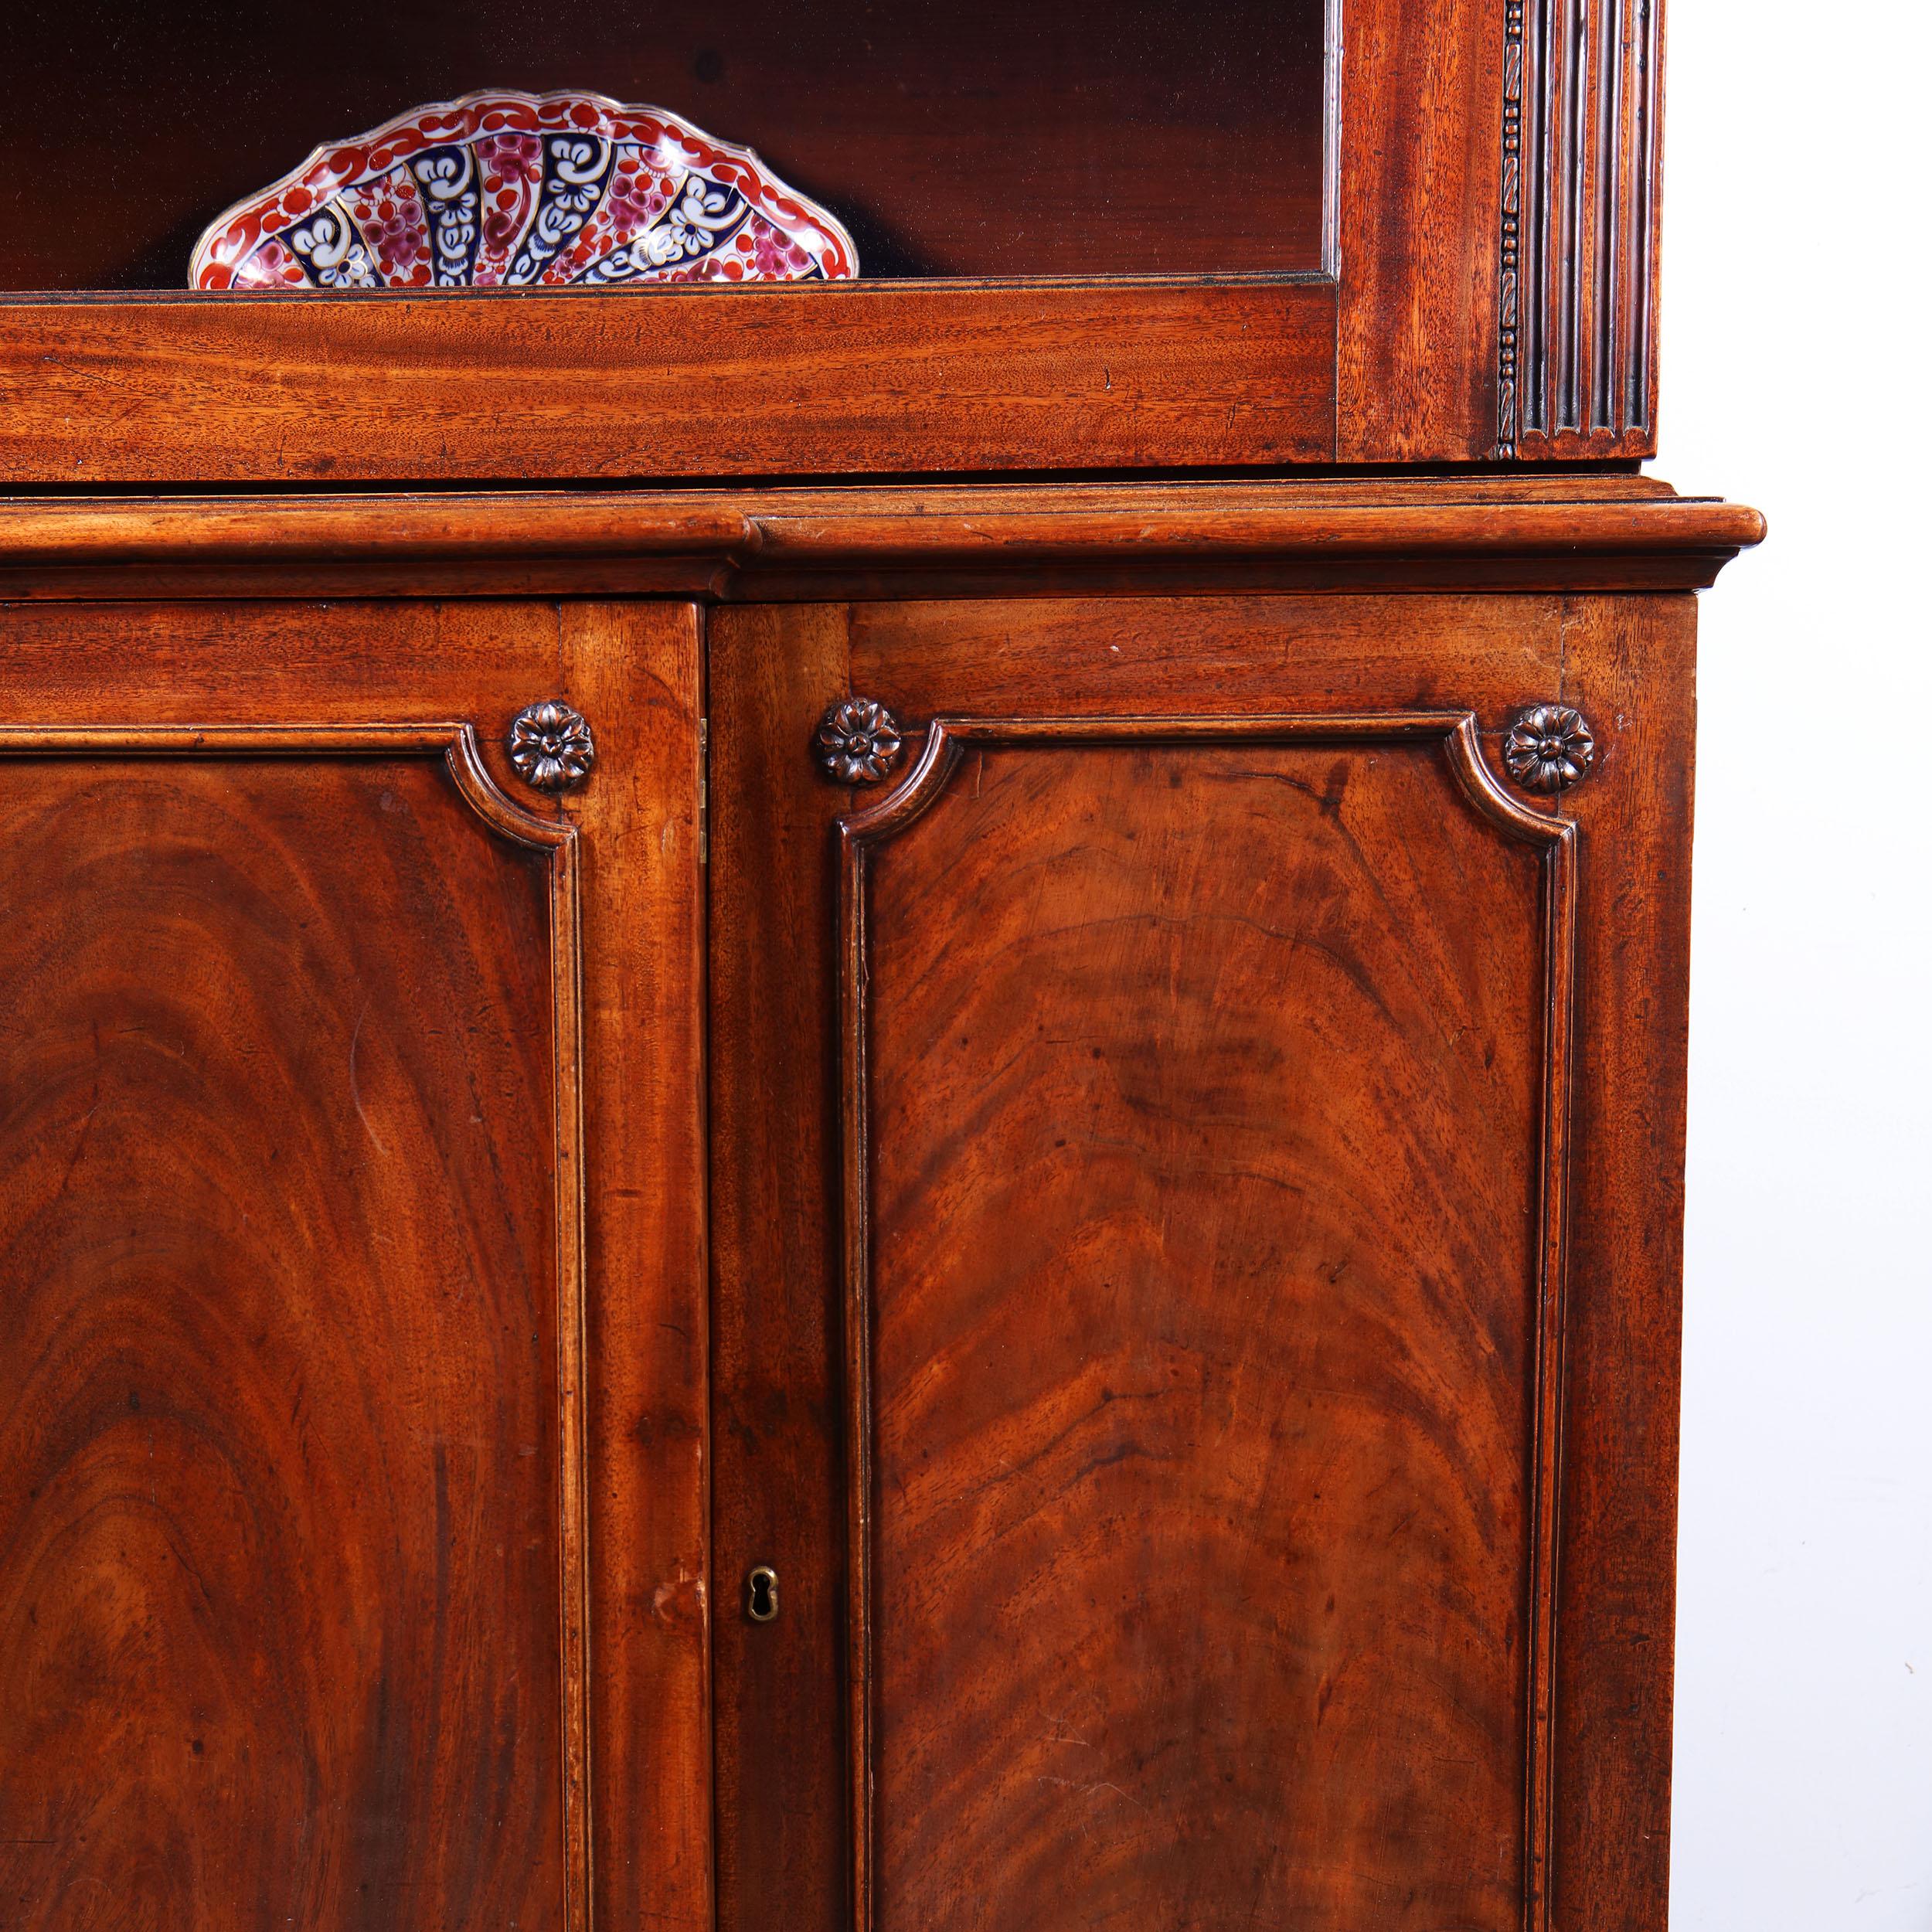 George III Chippendale Period Mahogany Breakfront Bookcase In Good Condition For Sale In London, by appointment only